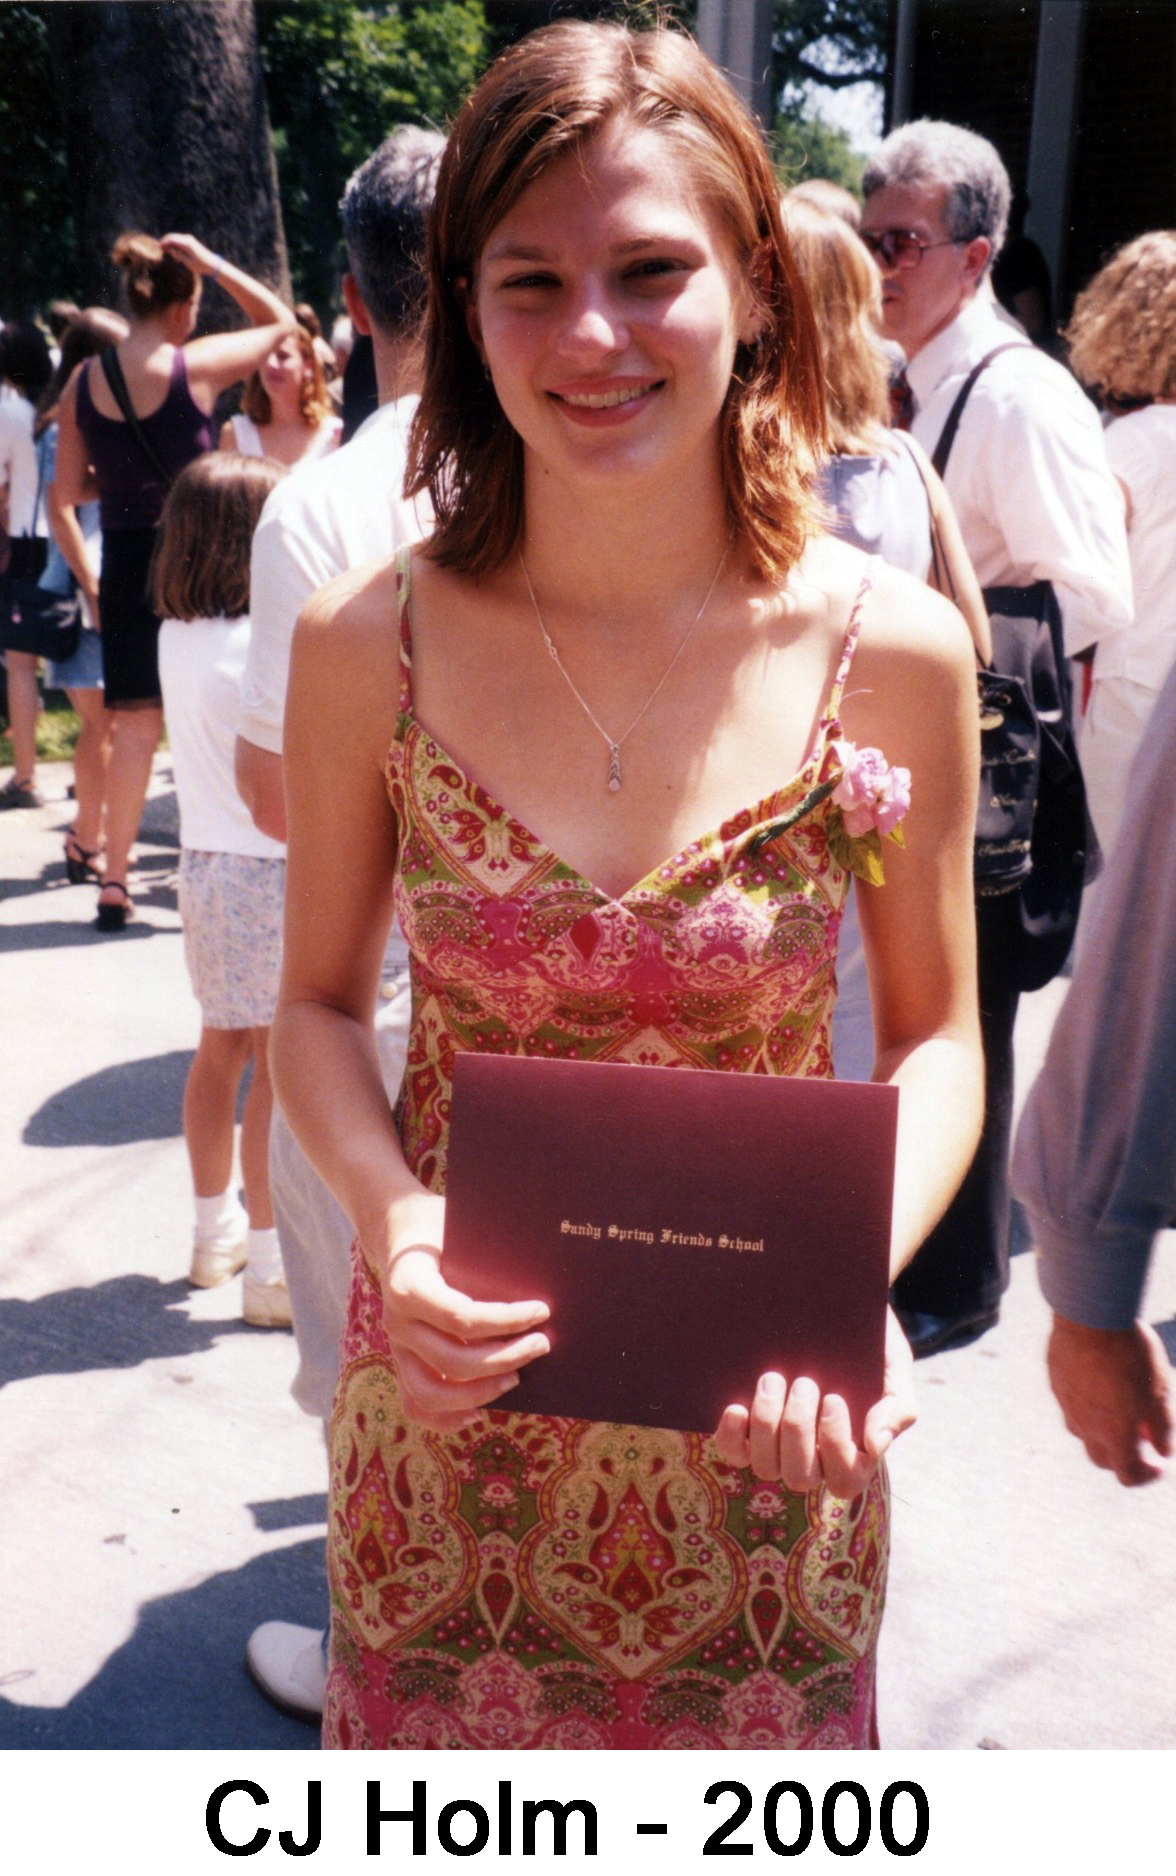 She is wering a colorful dress and holding the maroon diploma case